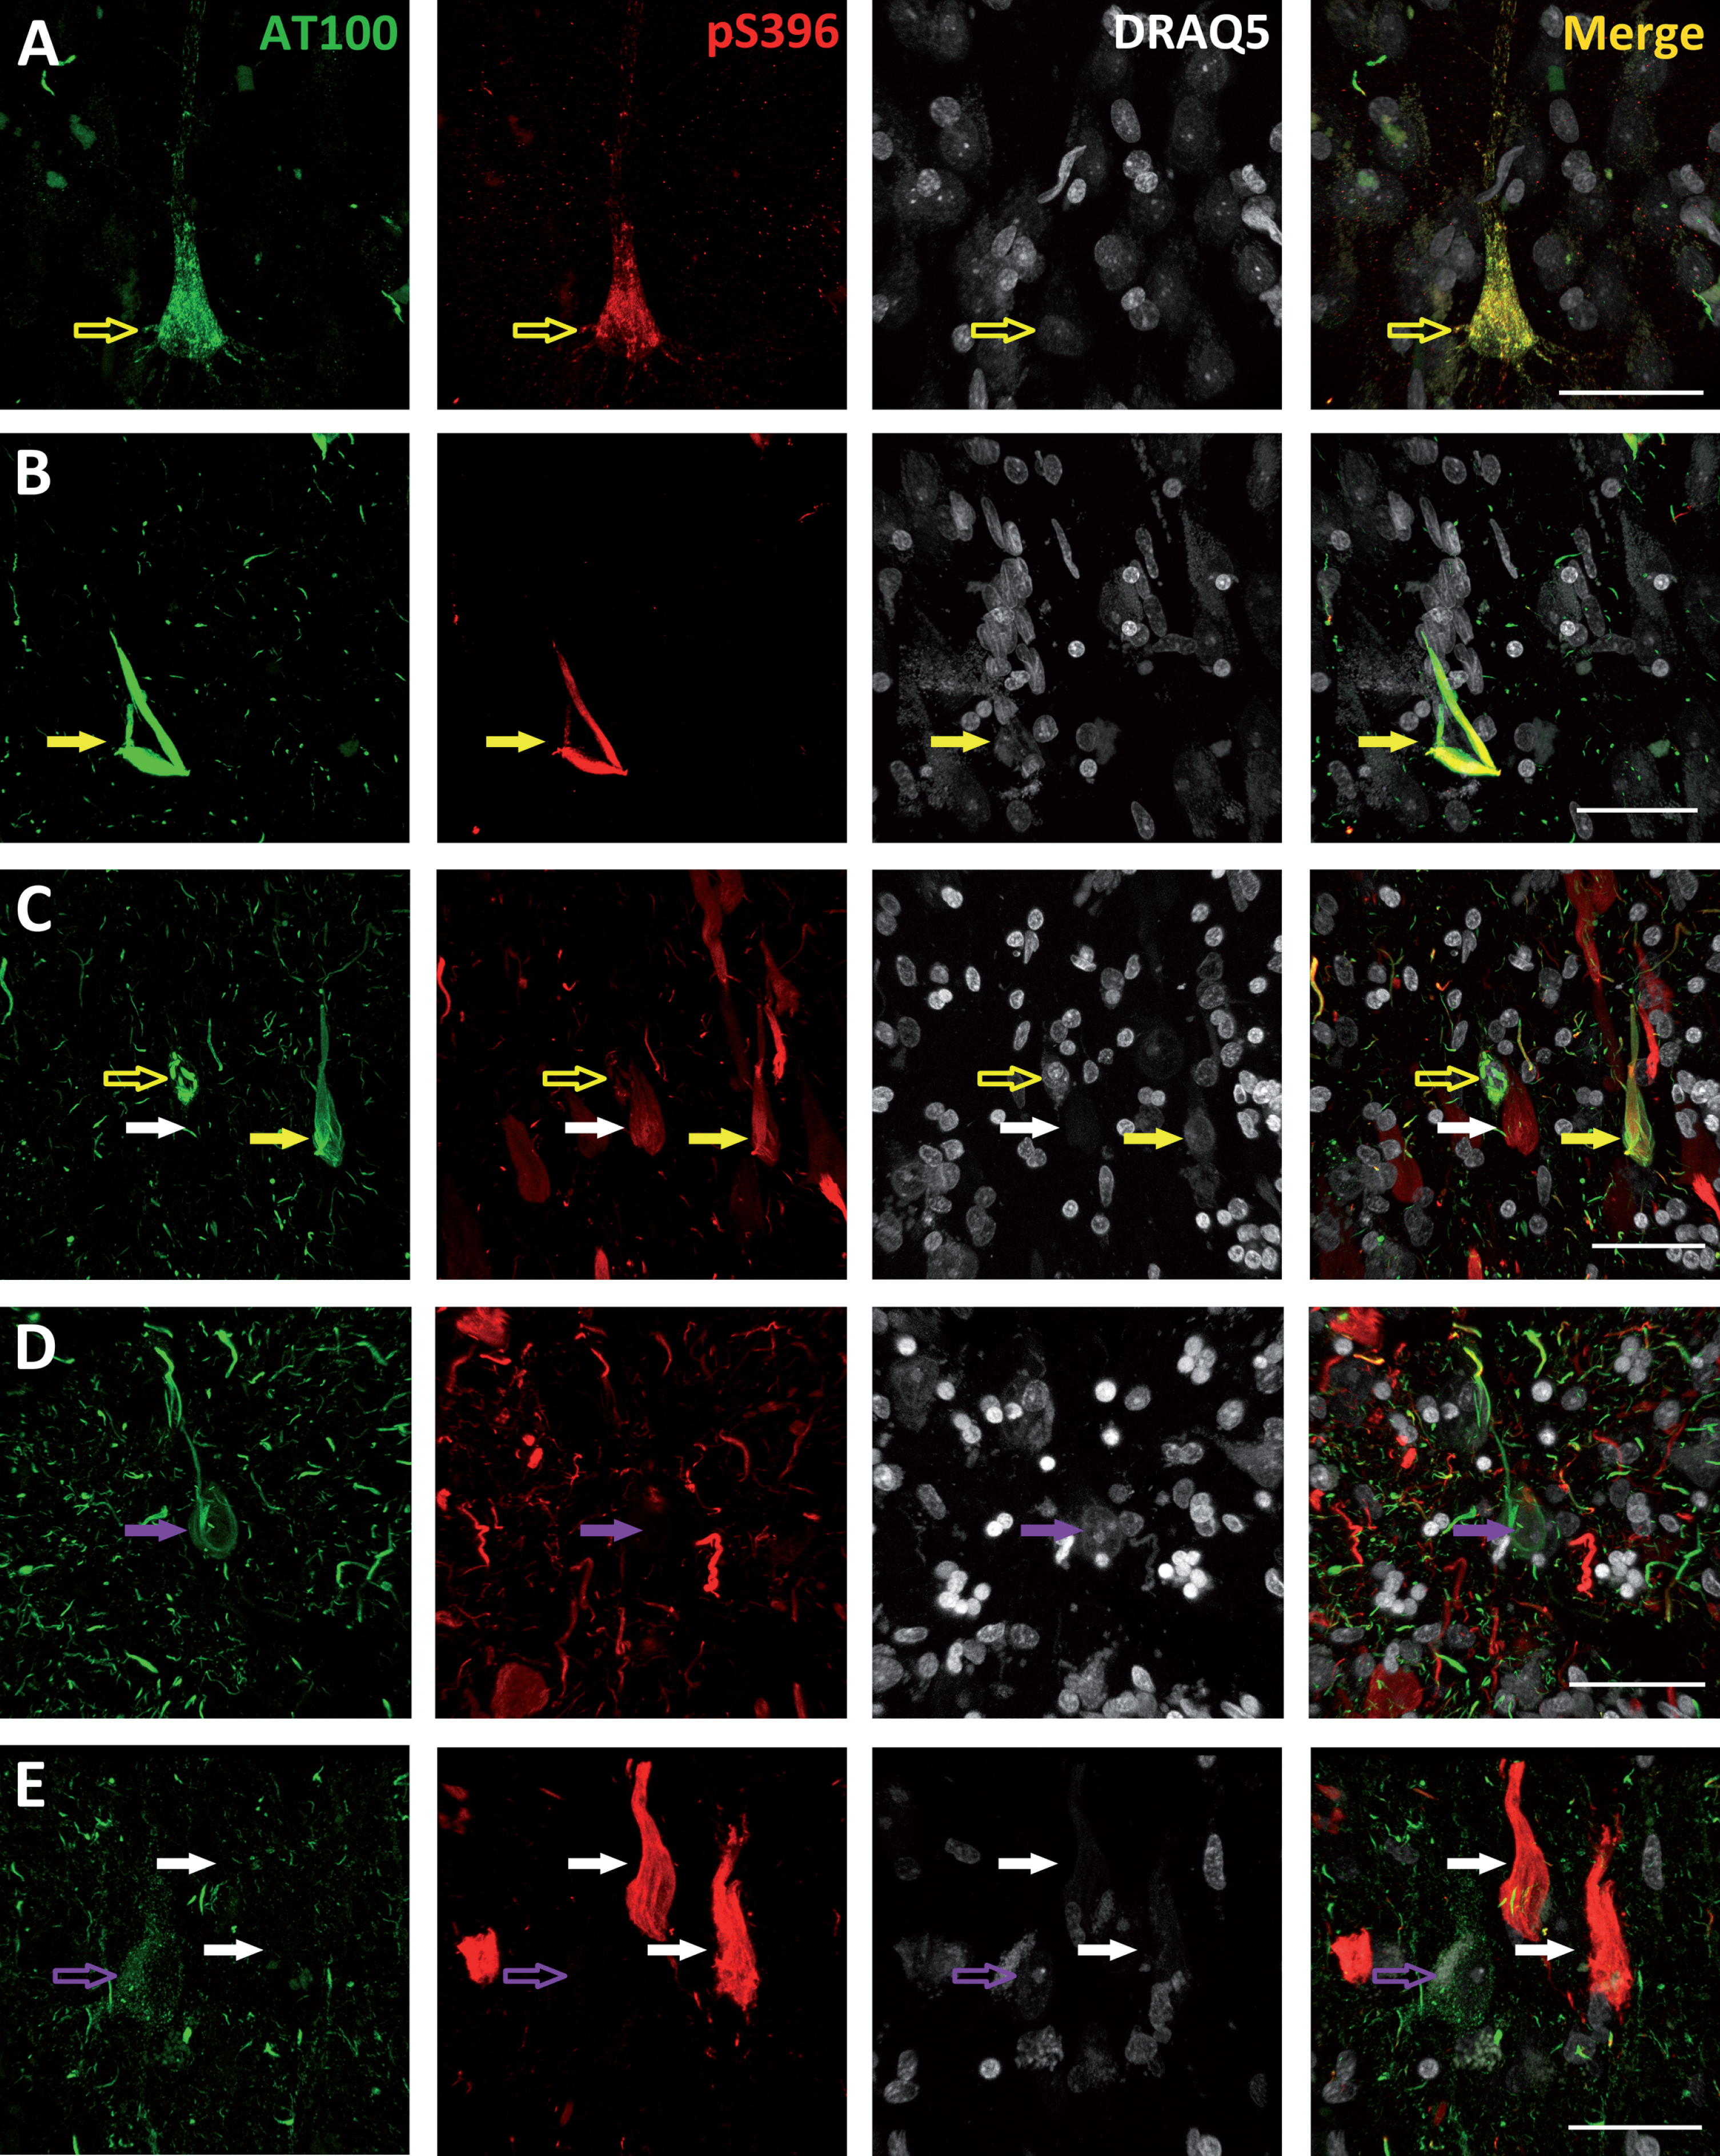 Photomicrographs belonging to cases with Braak stage I (A), III (B), and VI (C, D, and E) illustrating the different patterns of AT100 (green), pS396 (red), and DRAQ5 (grey) labeling found. Empty arrows indicate neurons with a granular staining—either AT100 positive (empty purple arrows) or both AT100 and pS396 positive (empty yellow arrows). Filled arrows indicate NFTs: AT100 positive (purple arrows), pS396 positive (white arrows), or AT100 and pS396 positive (yellow arrows). Higher magnification of panels in Supplementary Figs. 1–5. All scale bars: 40 μm.